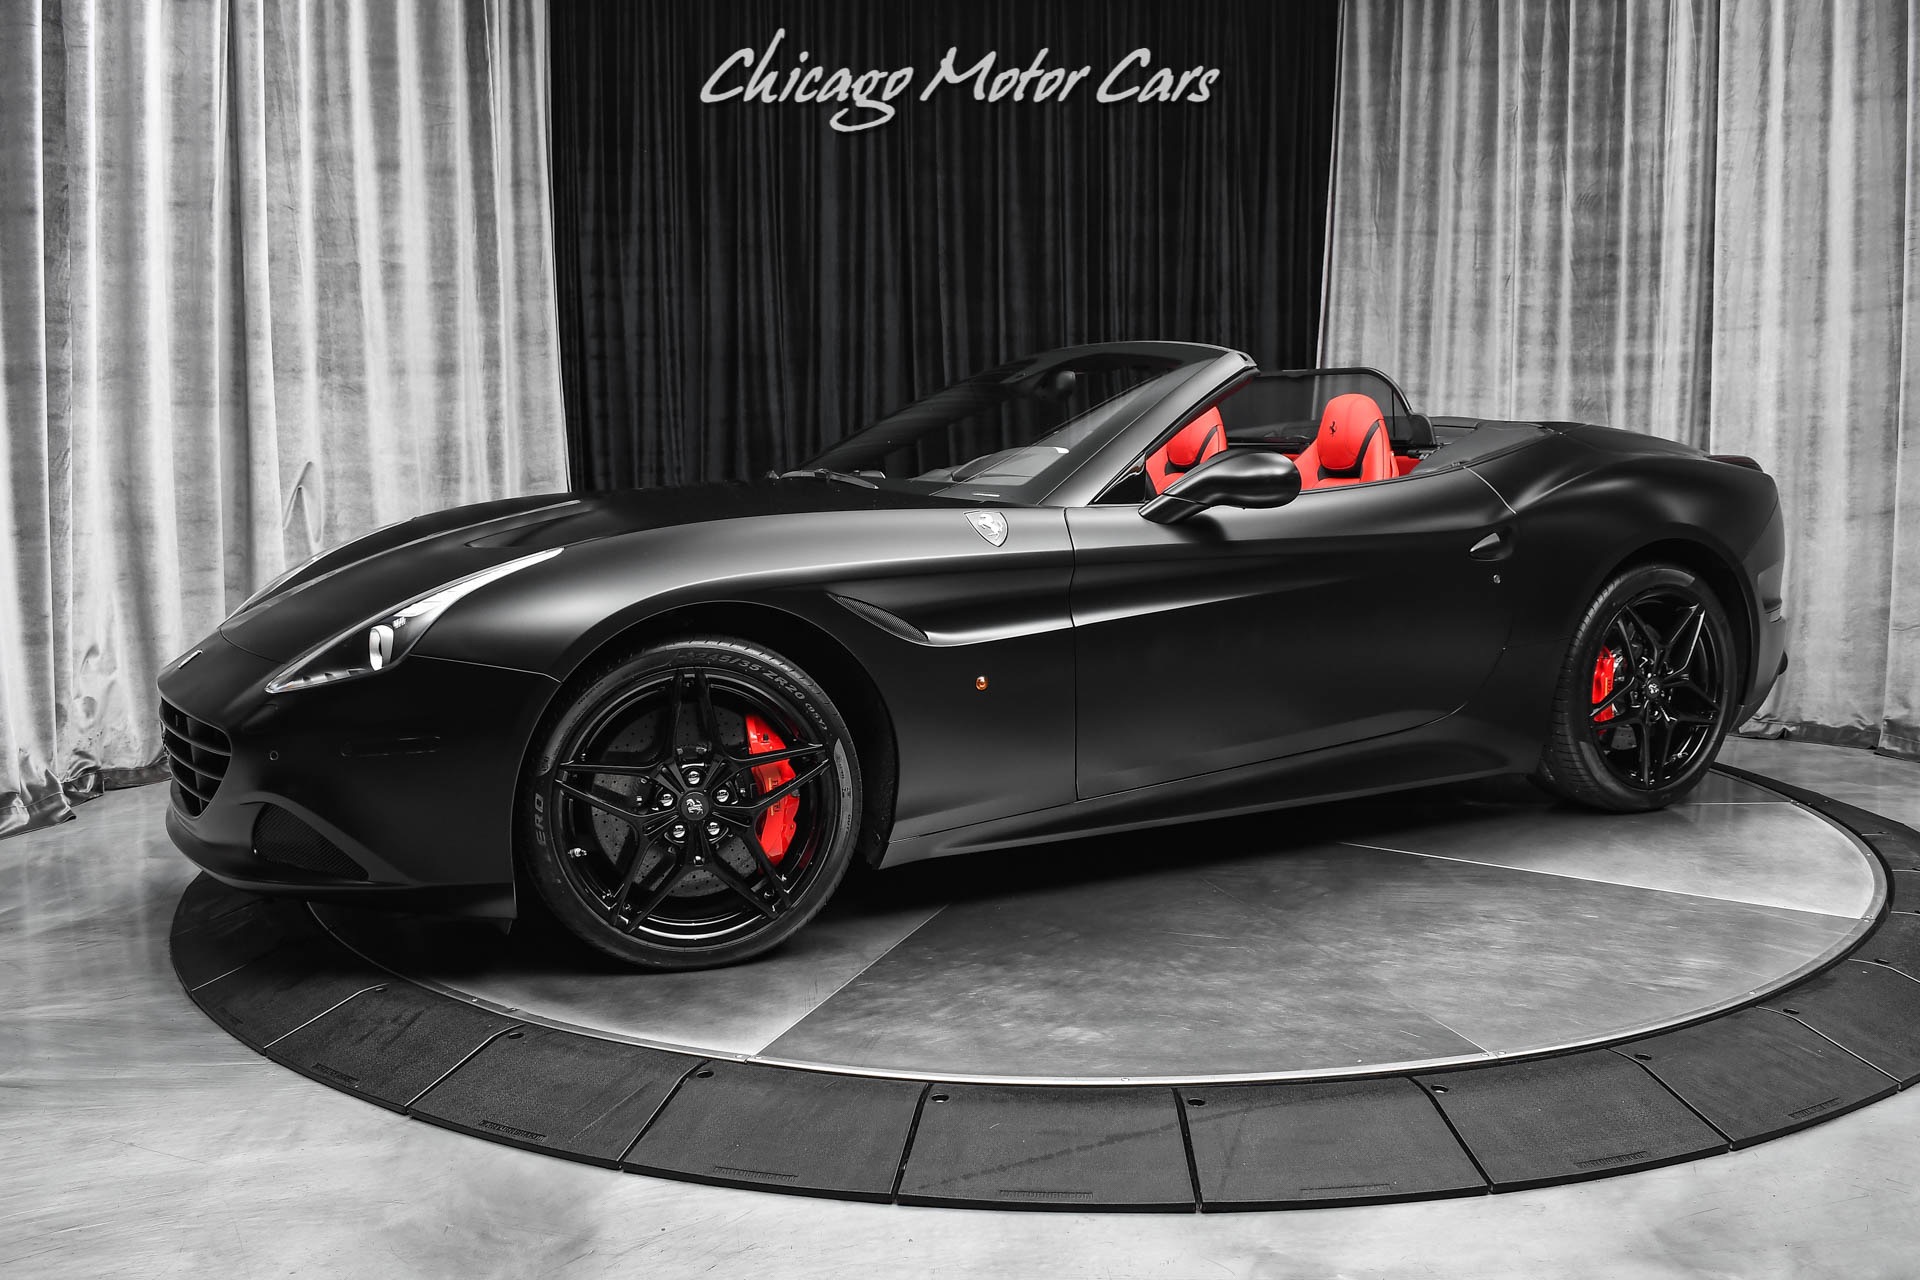 Used 2017 Ferrari California T HS HANDLING PACKAGE Full Satin PPF Amazing  Specification! For Sale (Special Pricing) | Chicago Motor Cars Stock #18175